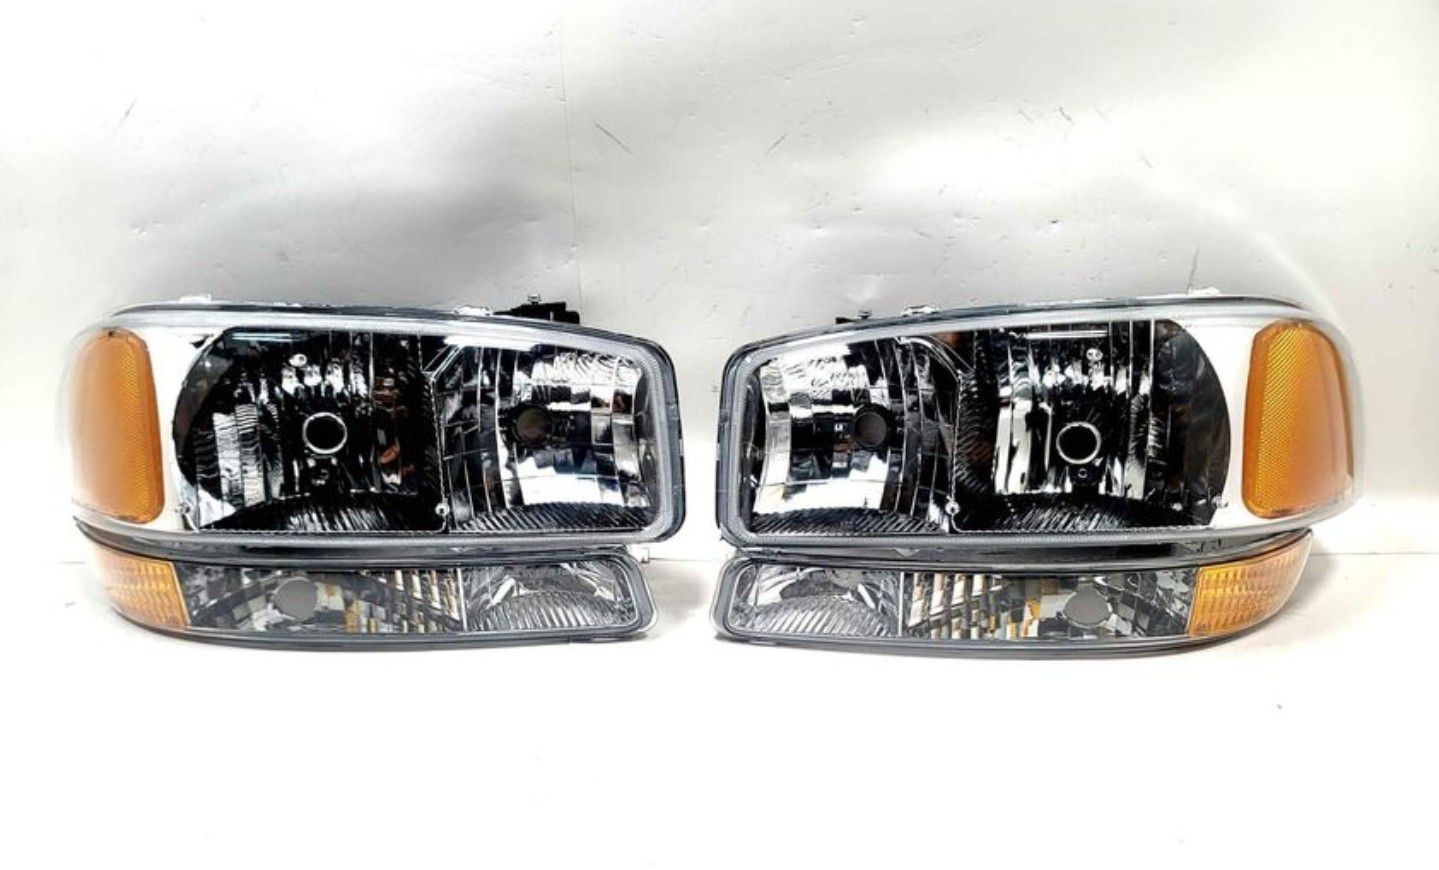 HEADLIGHTS FOR 99-07 GMC SIERRA YUKON XL + BUMPER LAMPS. with minor scratches 